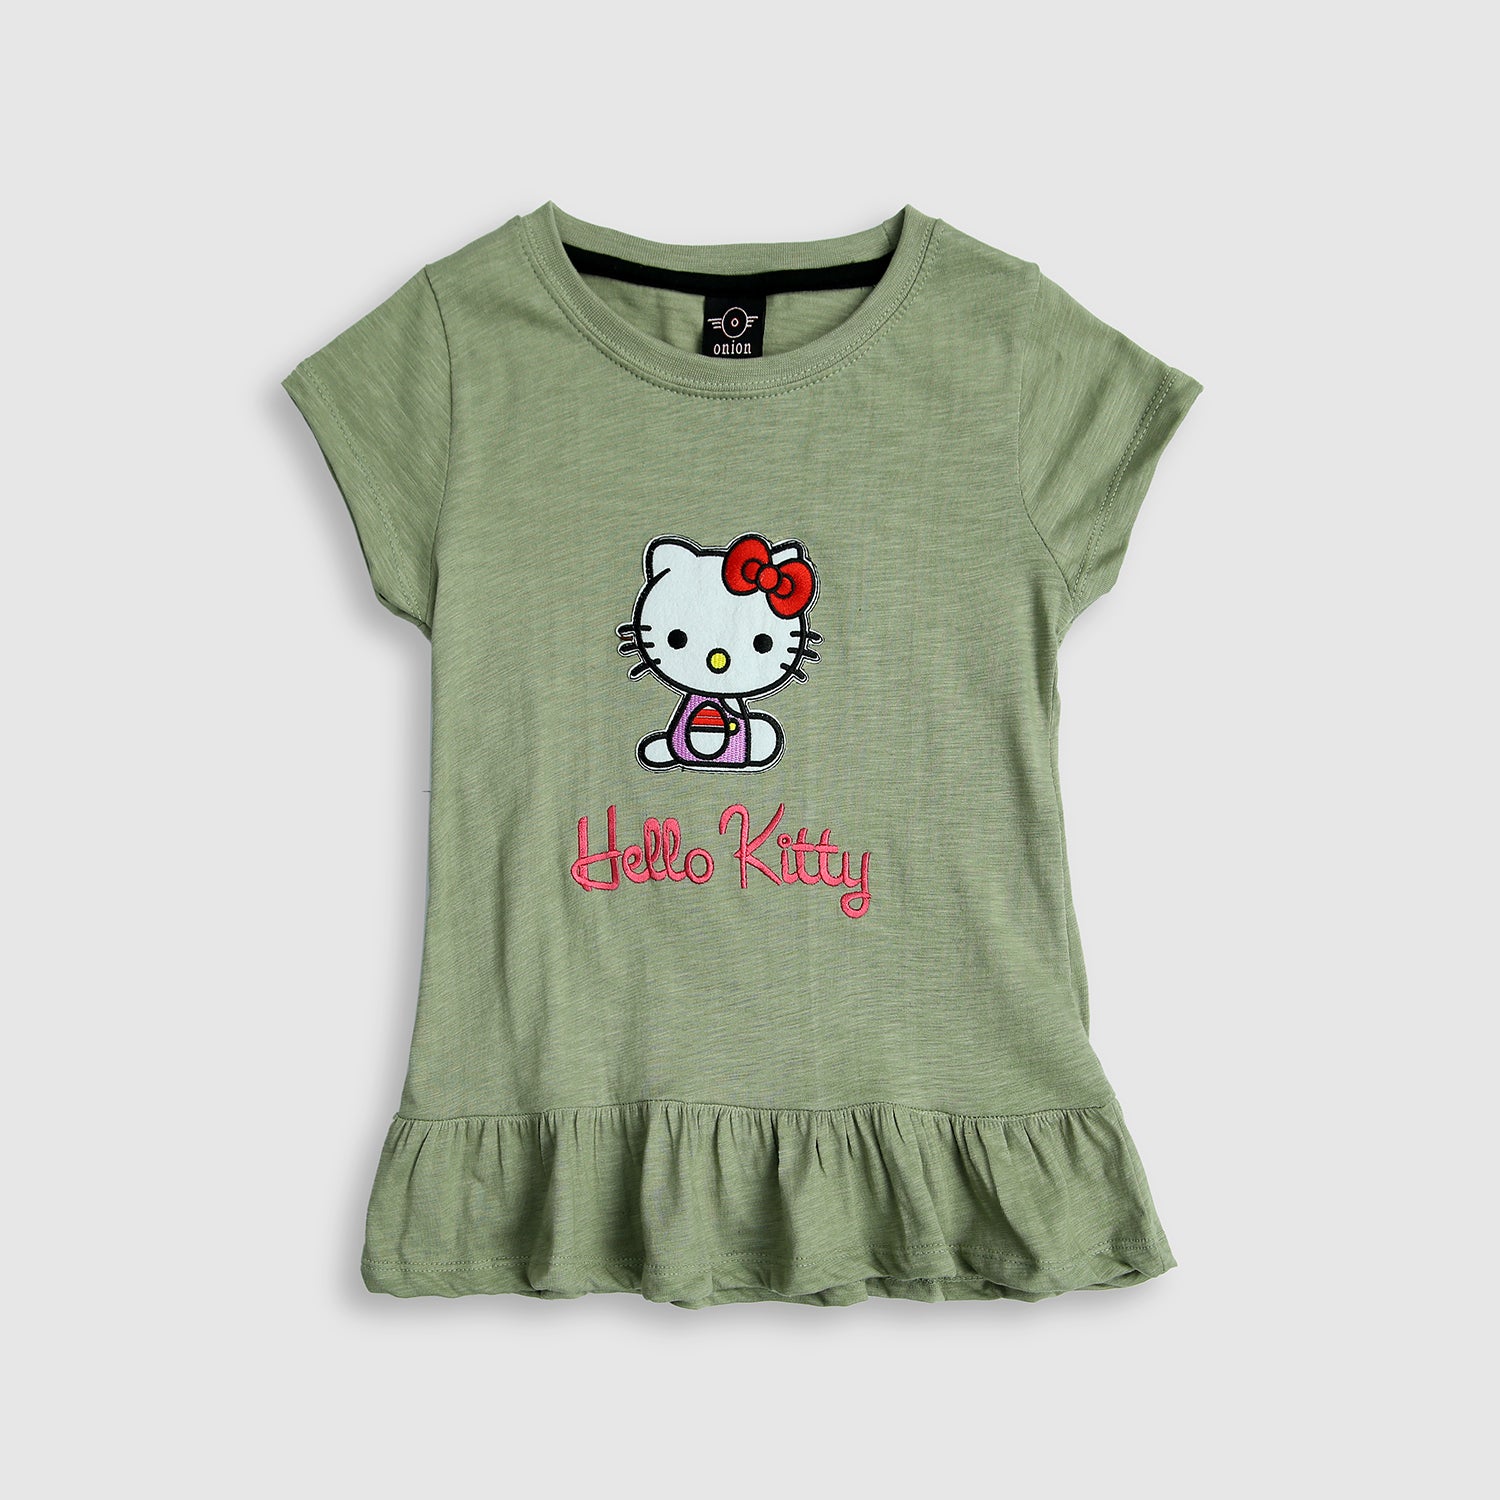 Girls Pure Cotton "Kitty" Graphic T-shirt Frock